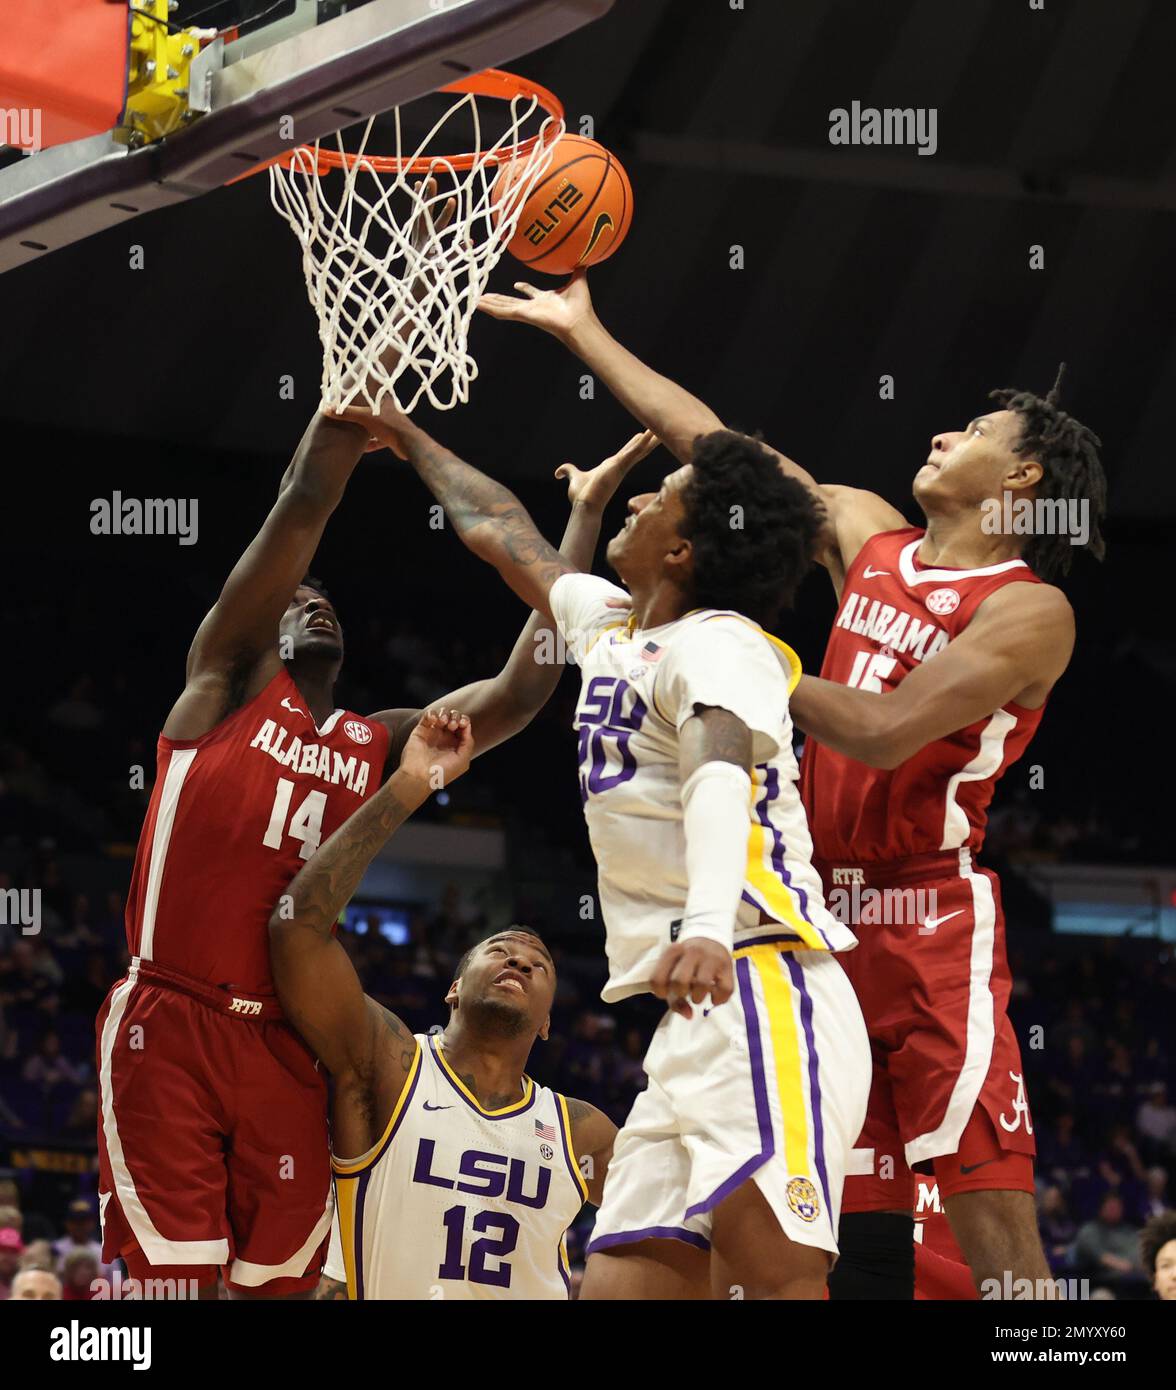 Baton Rouge, USA. 04th Feb, 2023. Alabama Crimson Tide forward Noah Clowney (15) reaches for an offensive rebound during a men's college basketball game at the Pete Maravich Assembly Center in Baton Rouge, Louisiana on Saturday, February 4, 2023. (Photo by Peter G. Forest/Sipa USA) Credit: Sipa USA/Alamy Live News Stock Photo